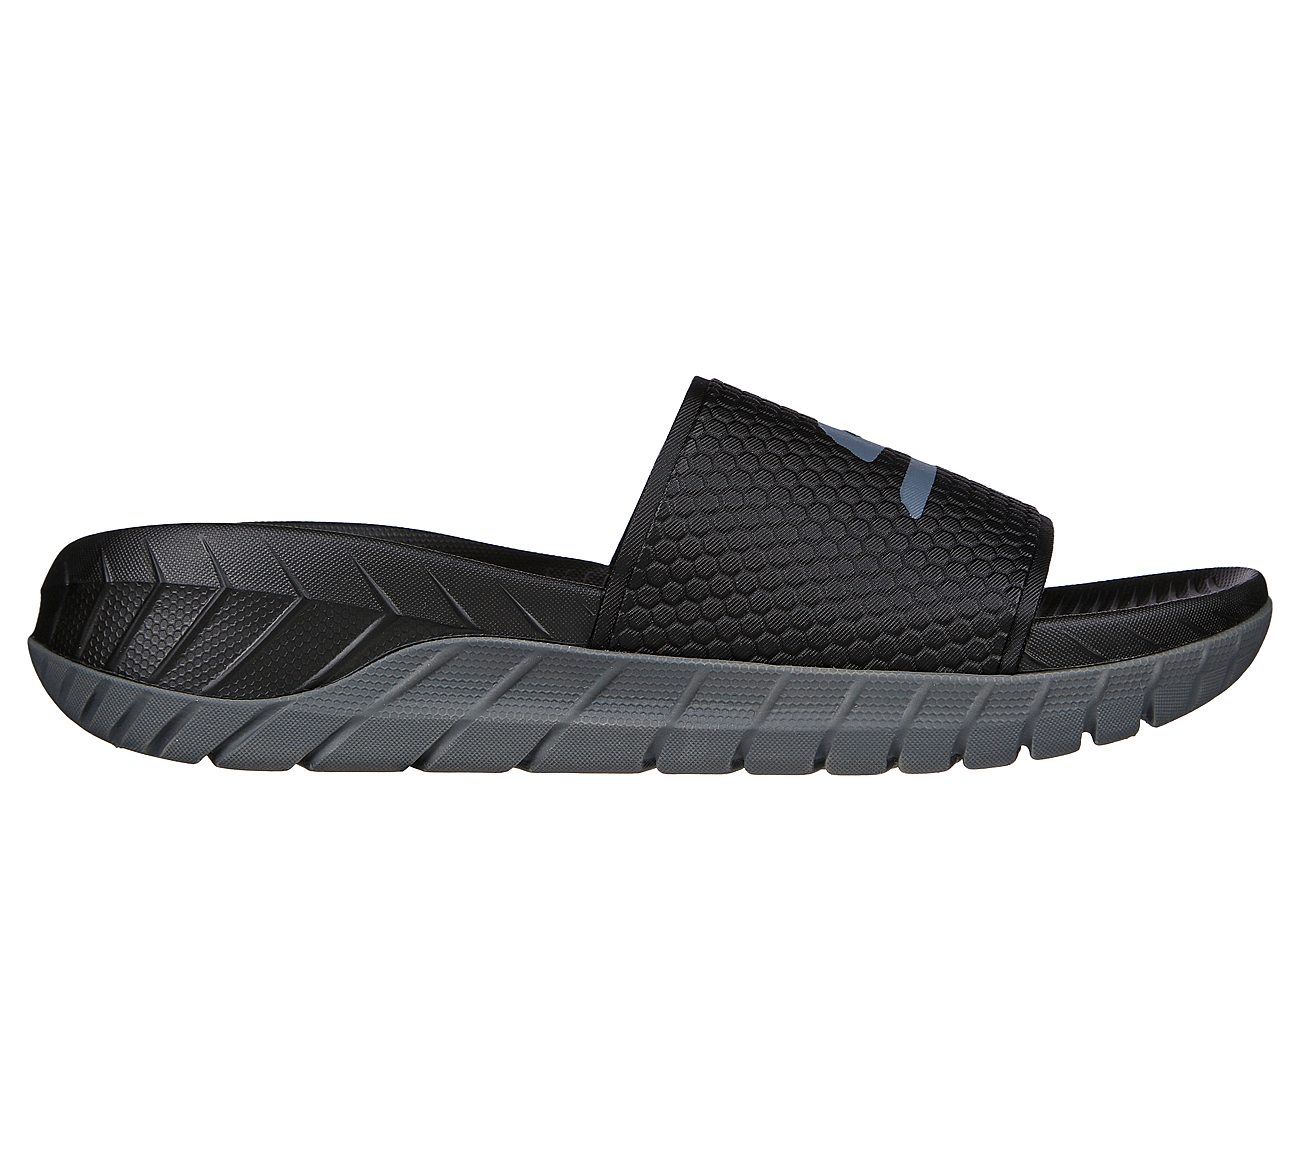 GO RECOVER SANDAL, BLACK/CHARCOAL Footwear Lateral View